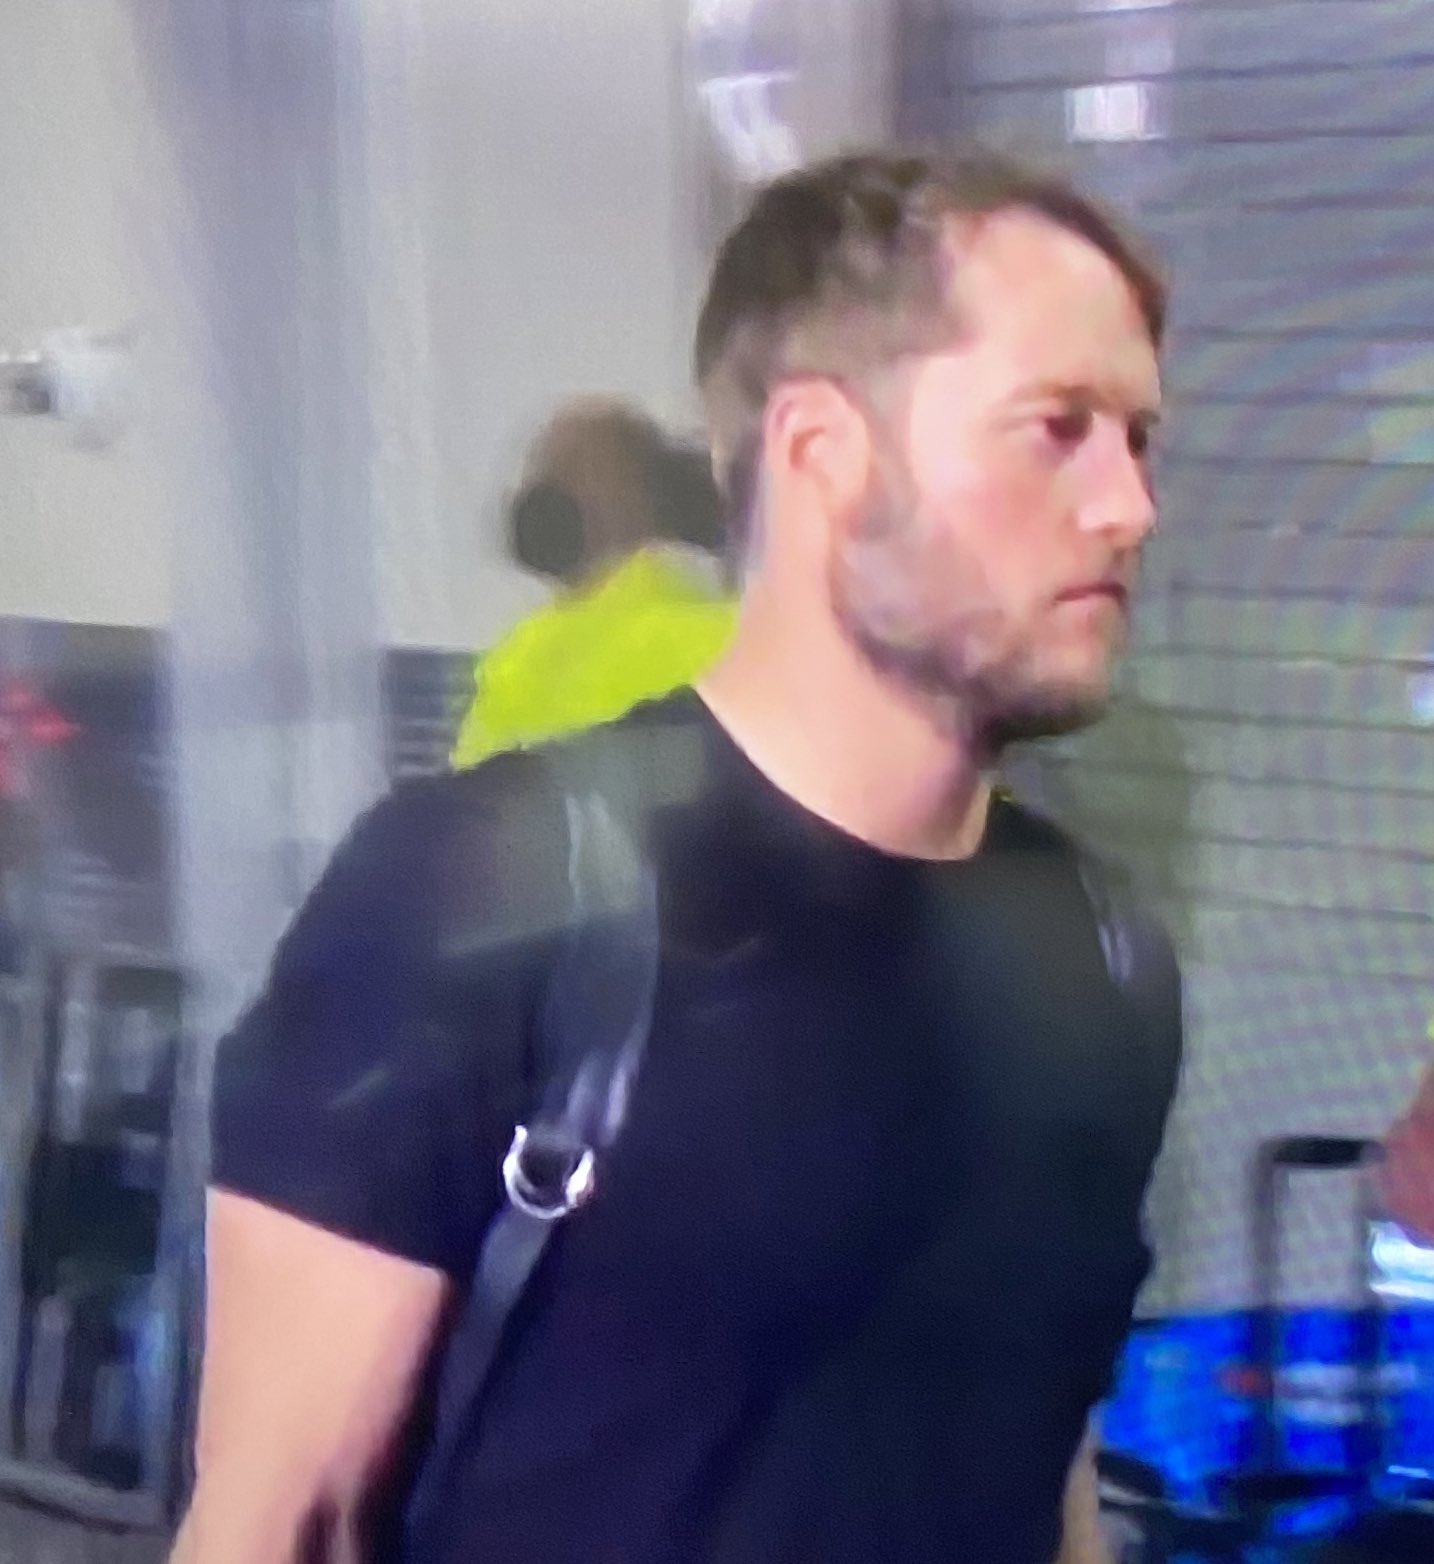 The Esports Writer on X: '#SuperBowl Joe Burrow shows up to the stadium in  a striped suit and bowler hat Matthew Stafford shows up to the stadium in a  plain black T-shirt